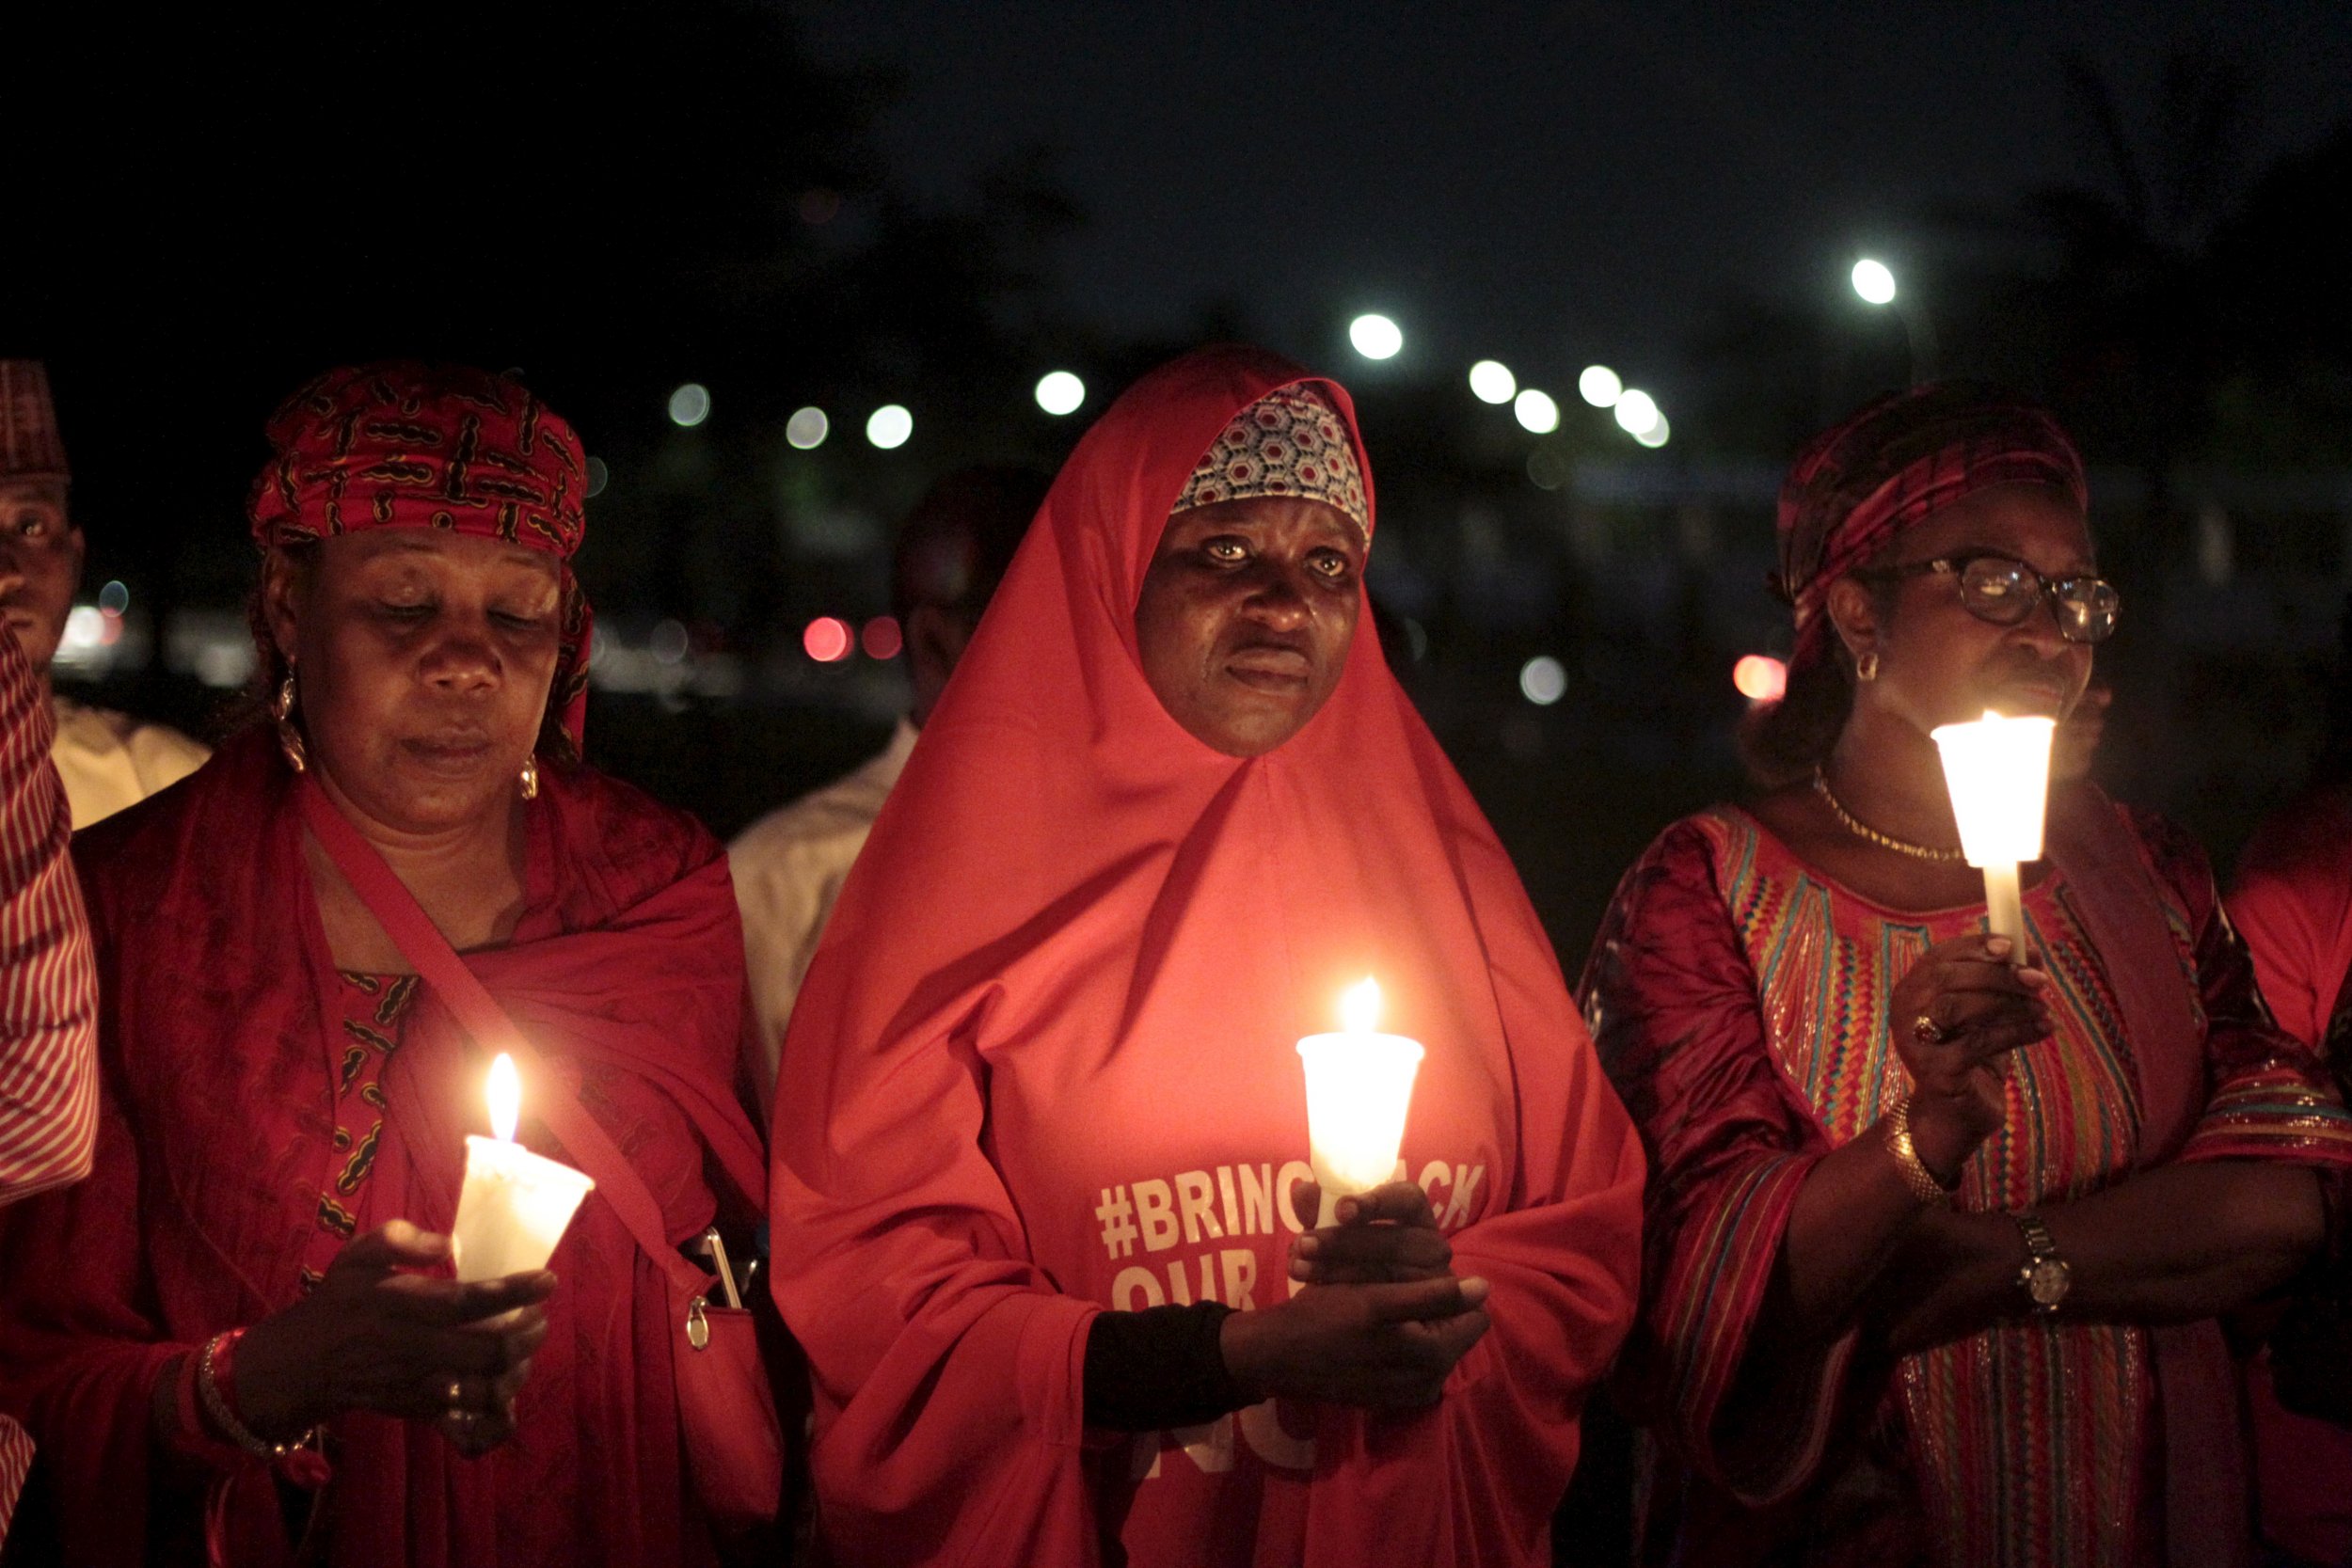 Bring Back Our Girls campaigners light candles.